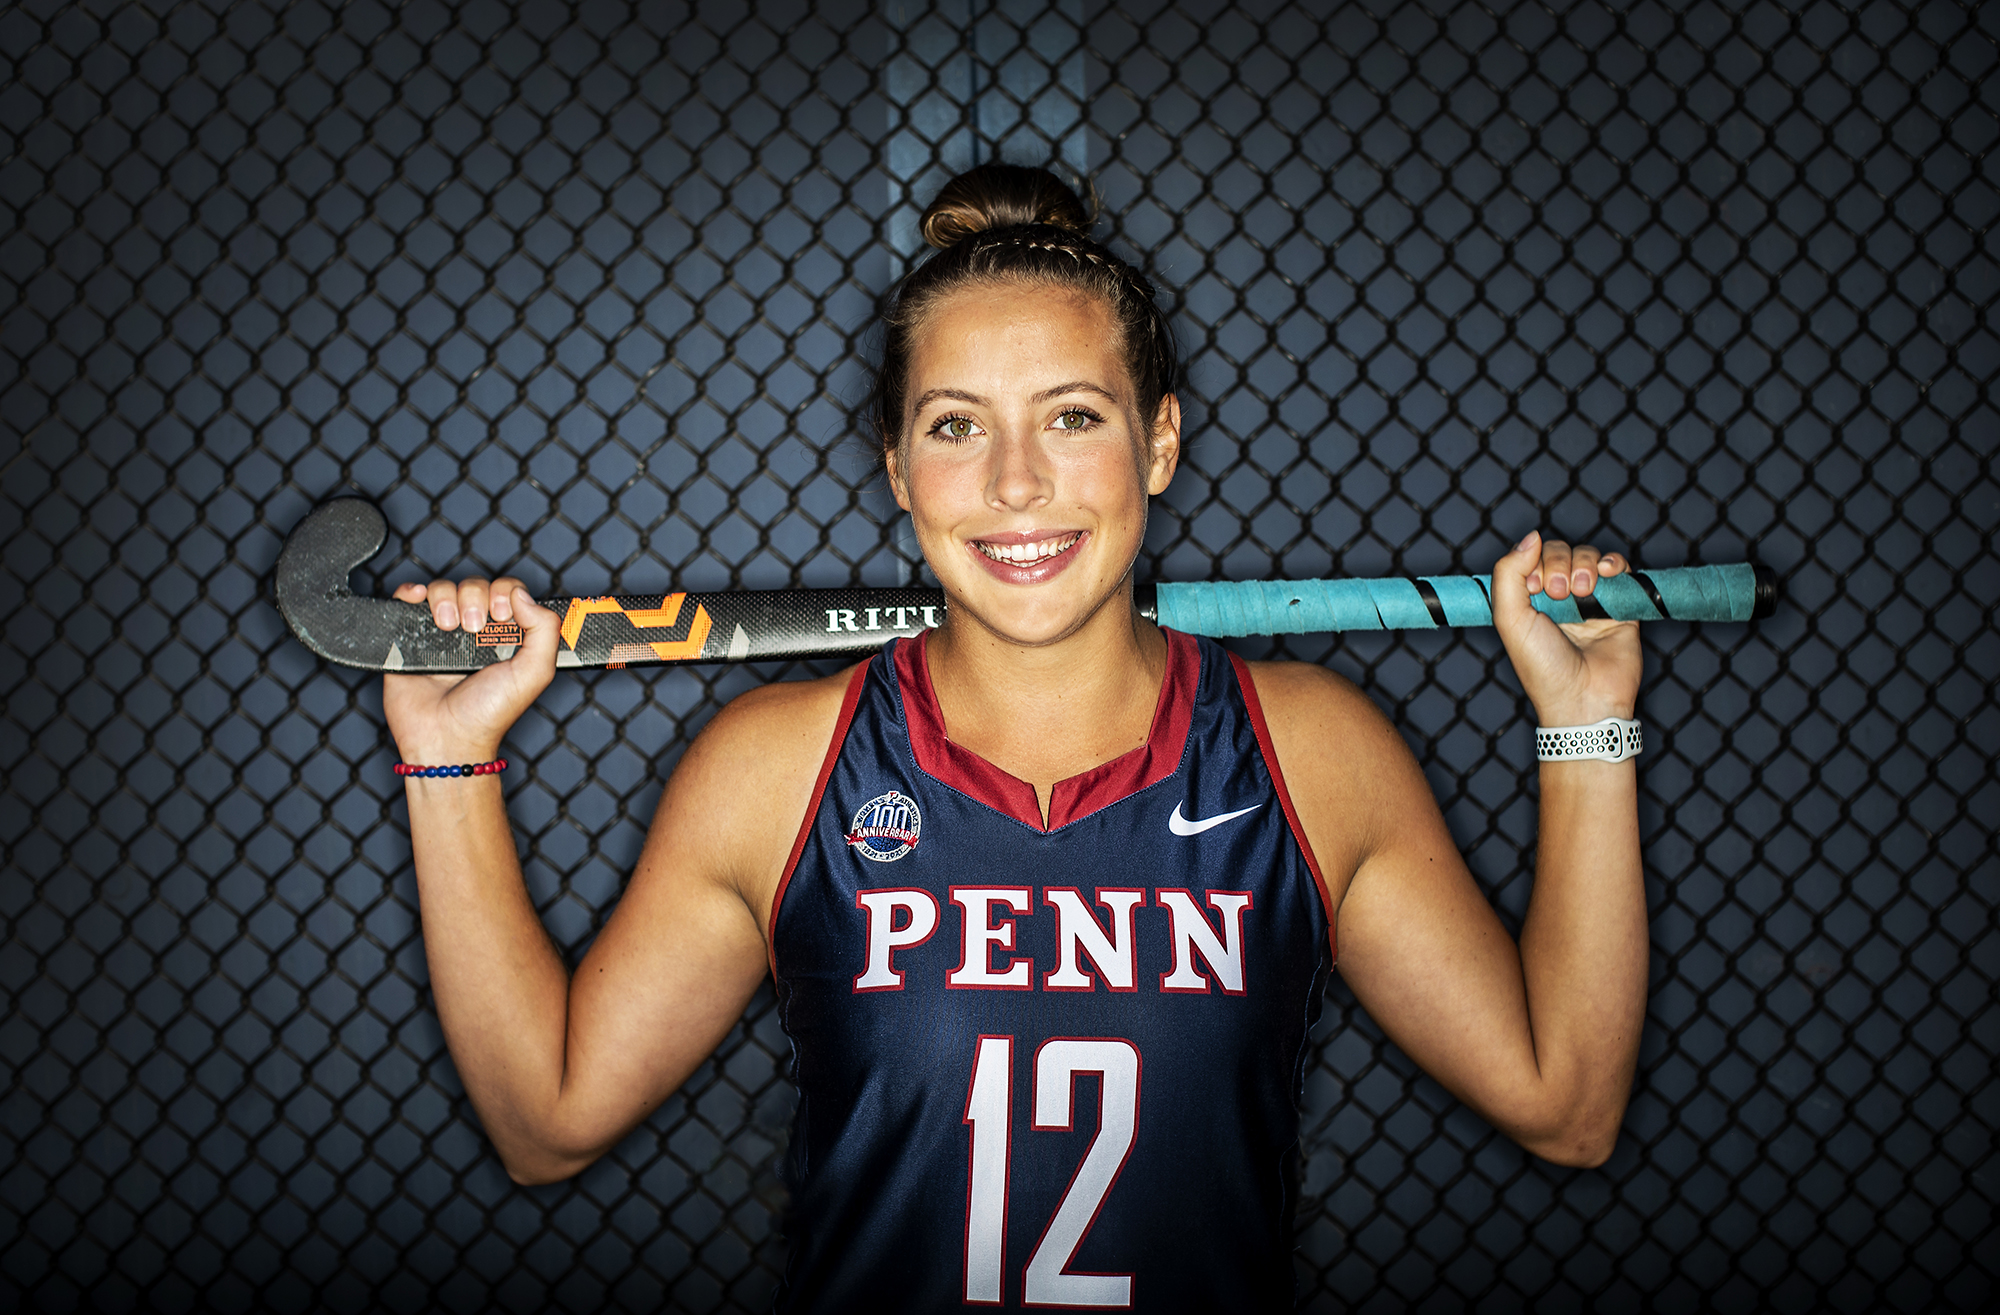 Banks holds her field hockey stick across her shoulders behind her neck.